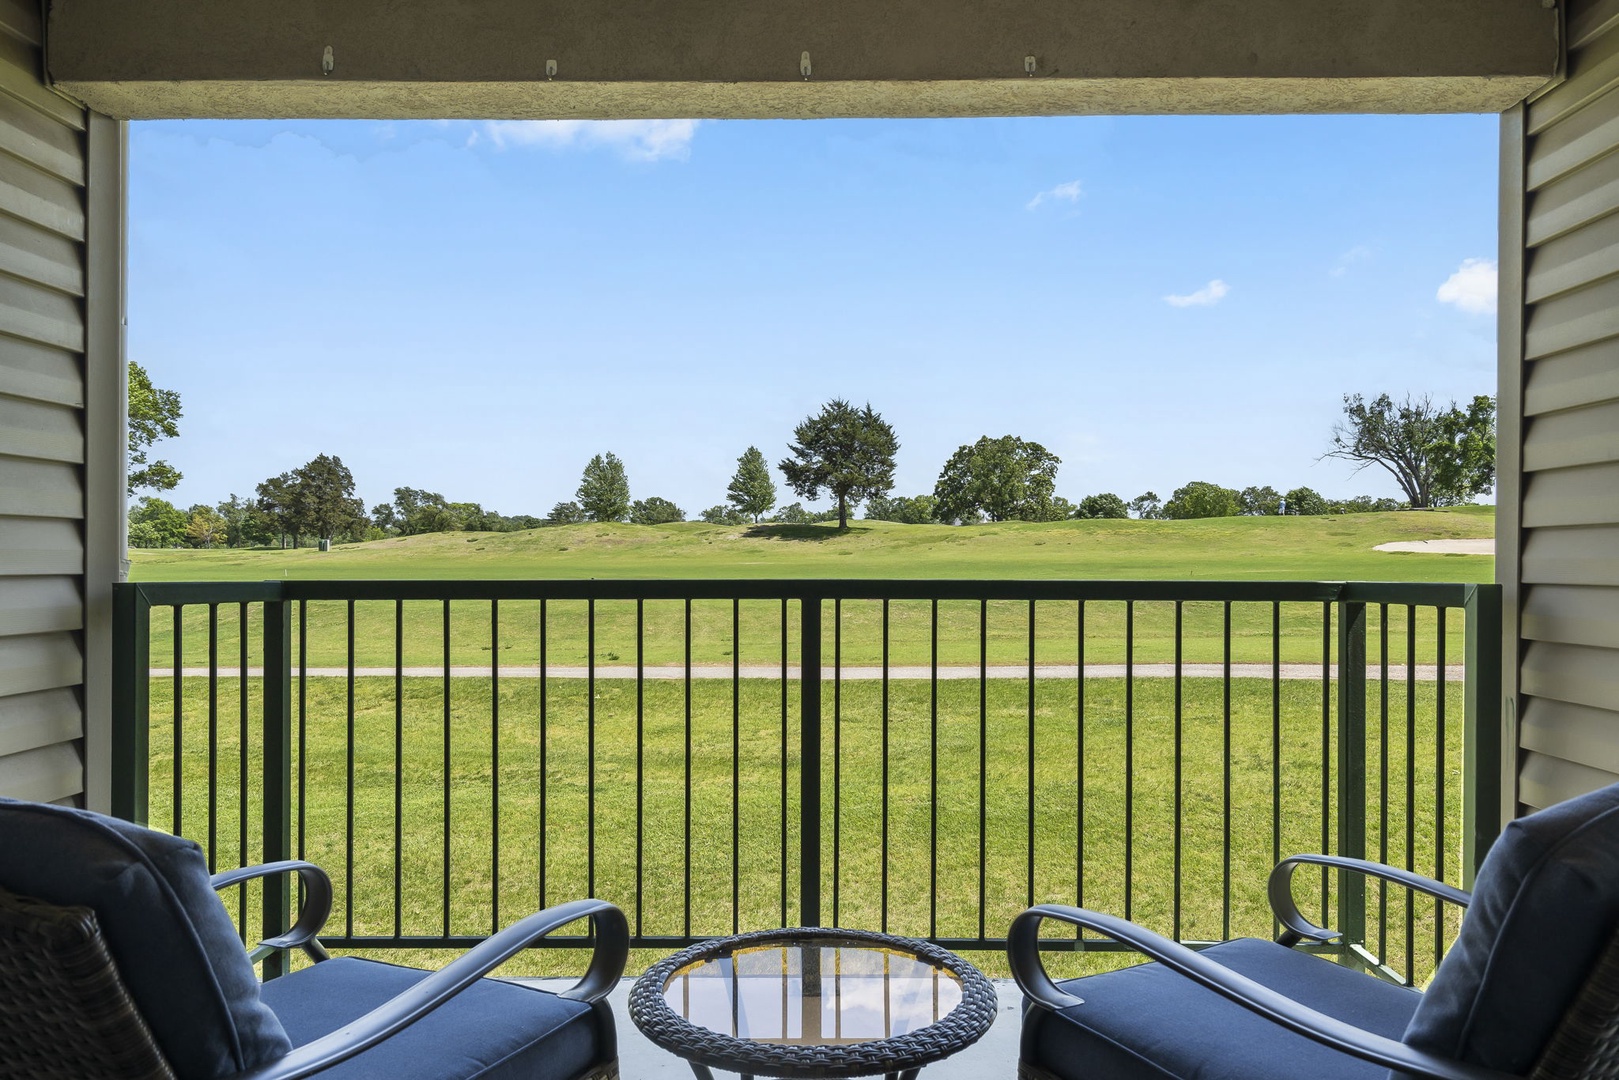 Enjoy the amazing golf course view from the balcony